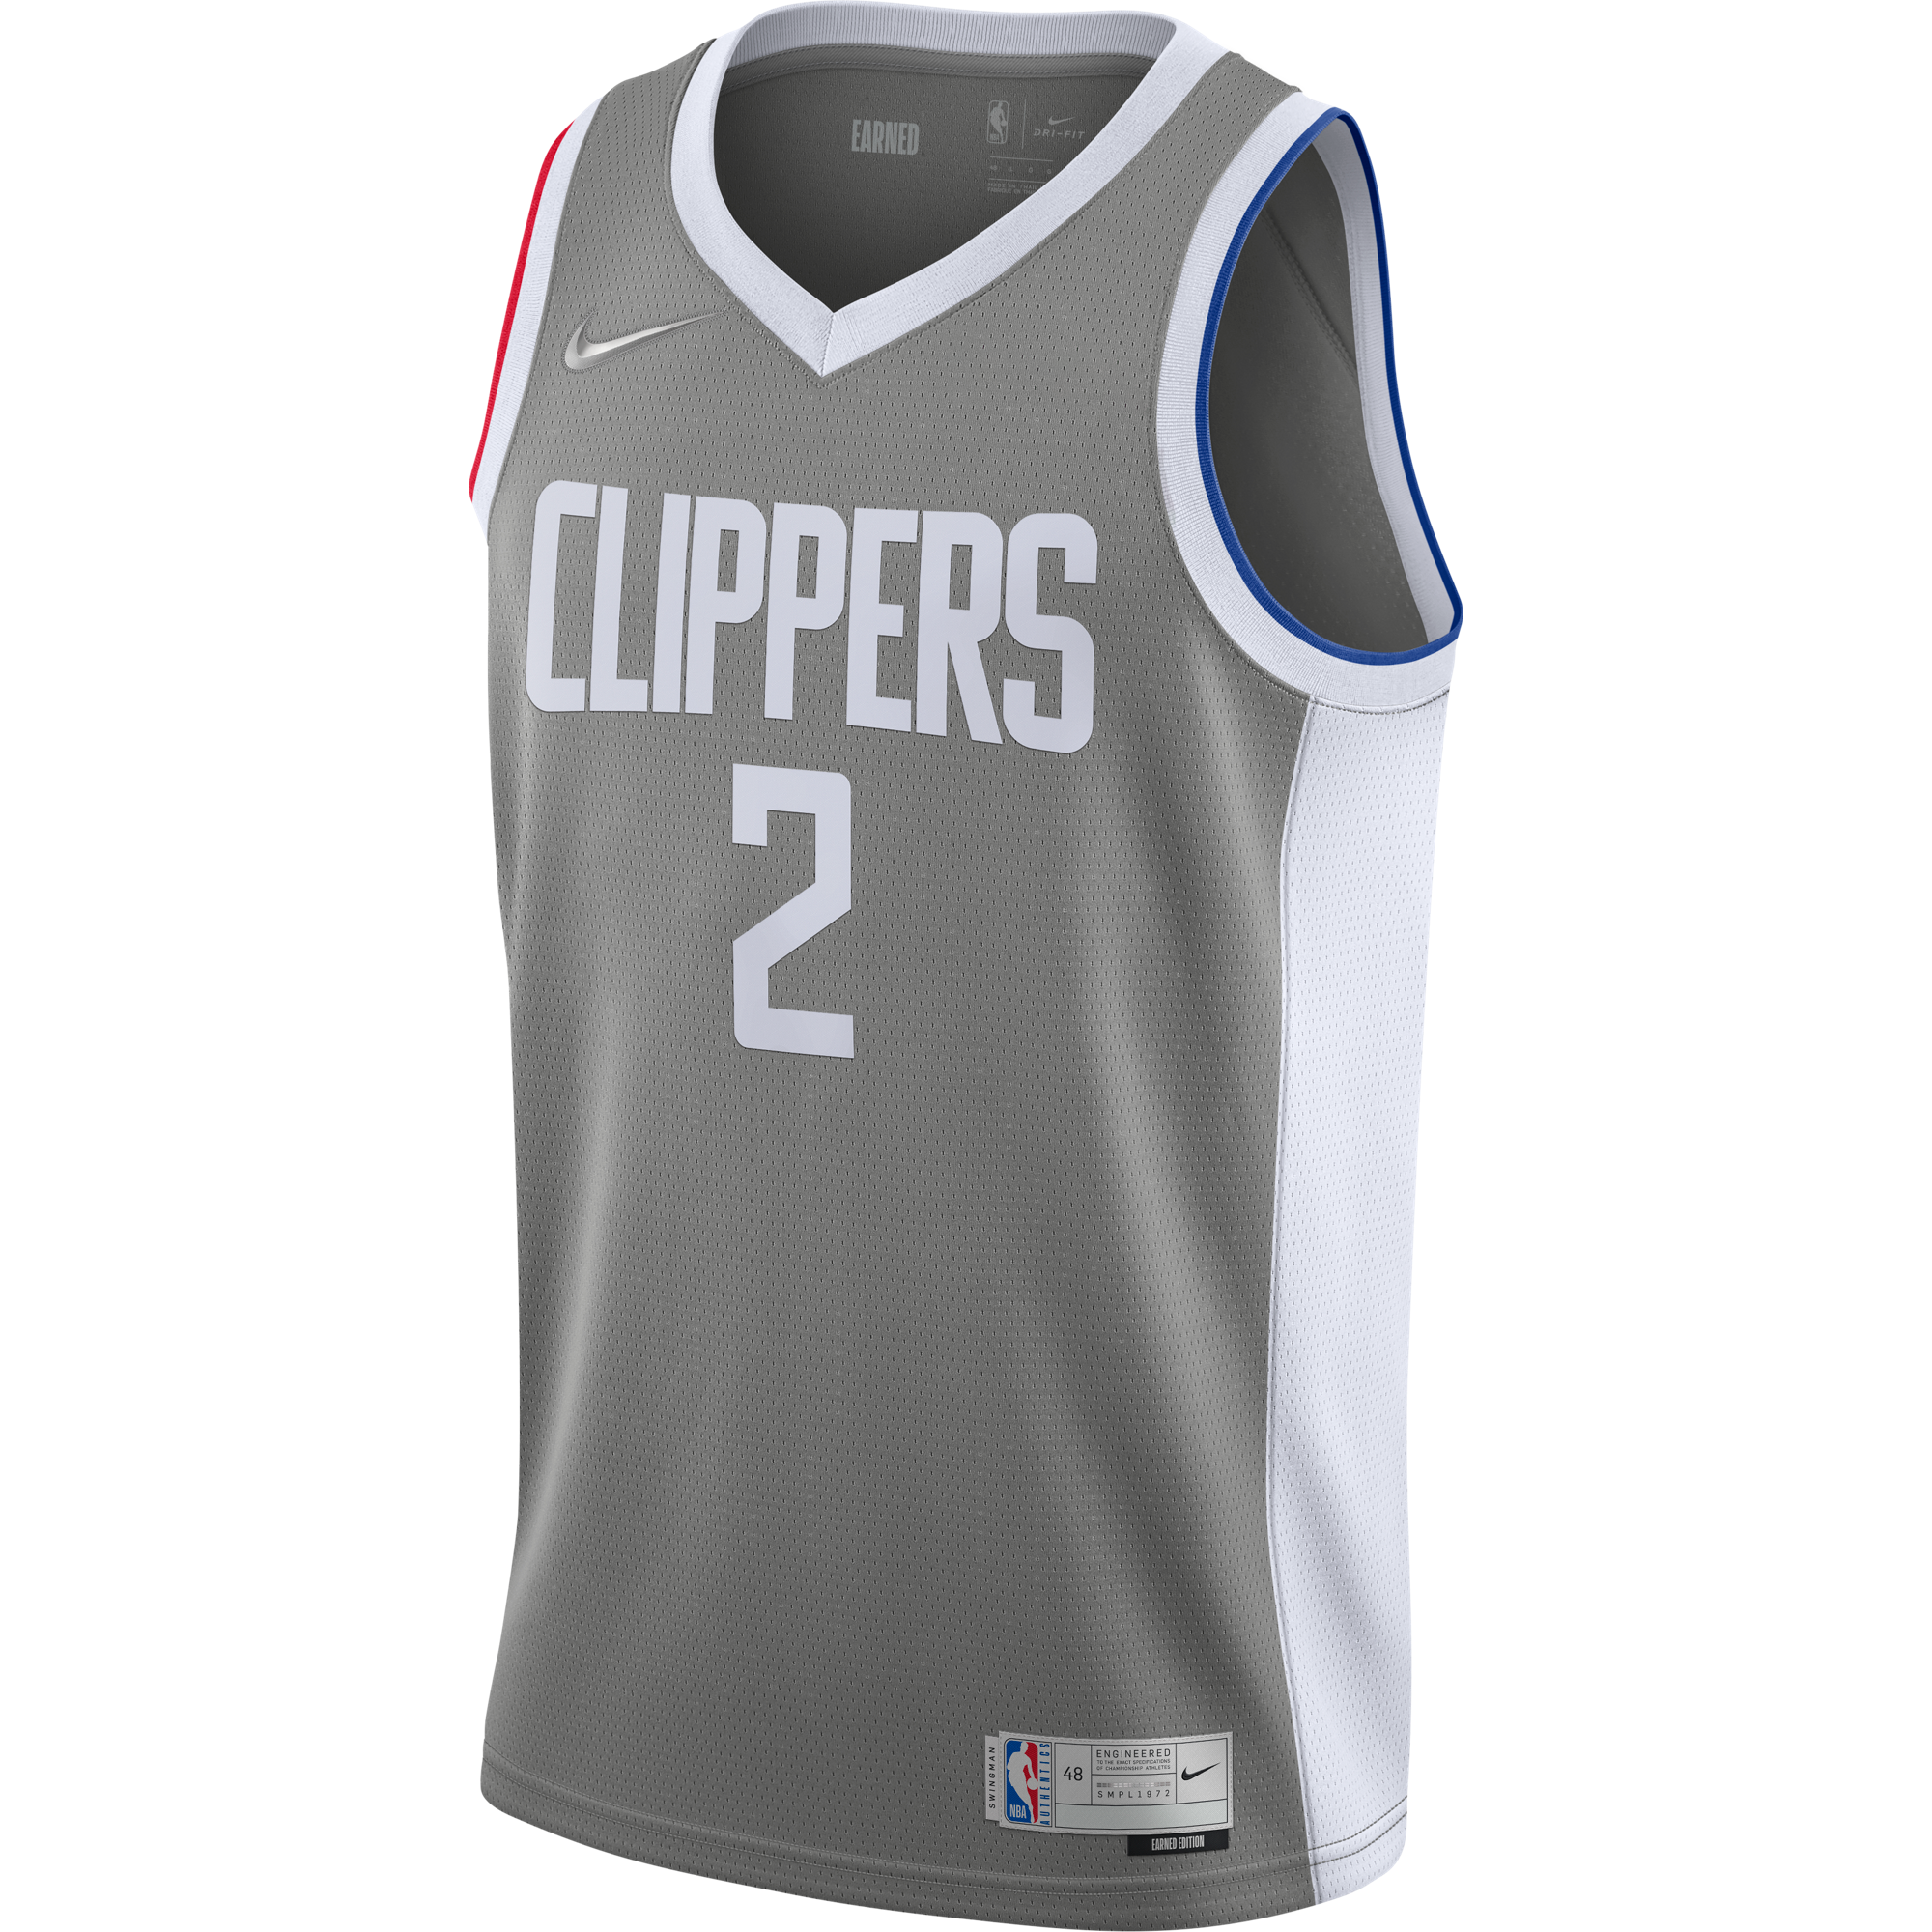 Fanatics La Clippers Youth Paul George Association Replica Jersey Youth S / White